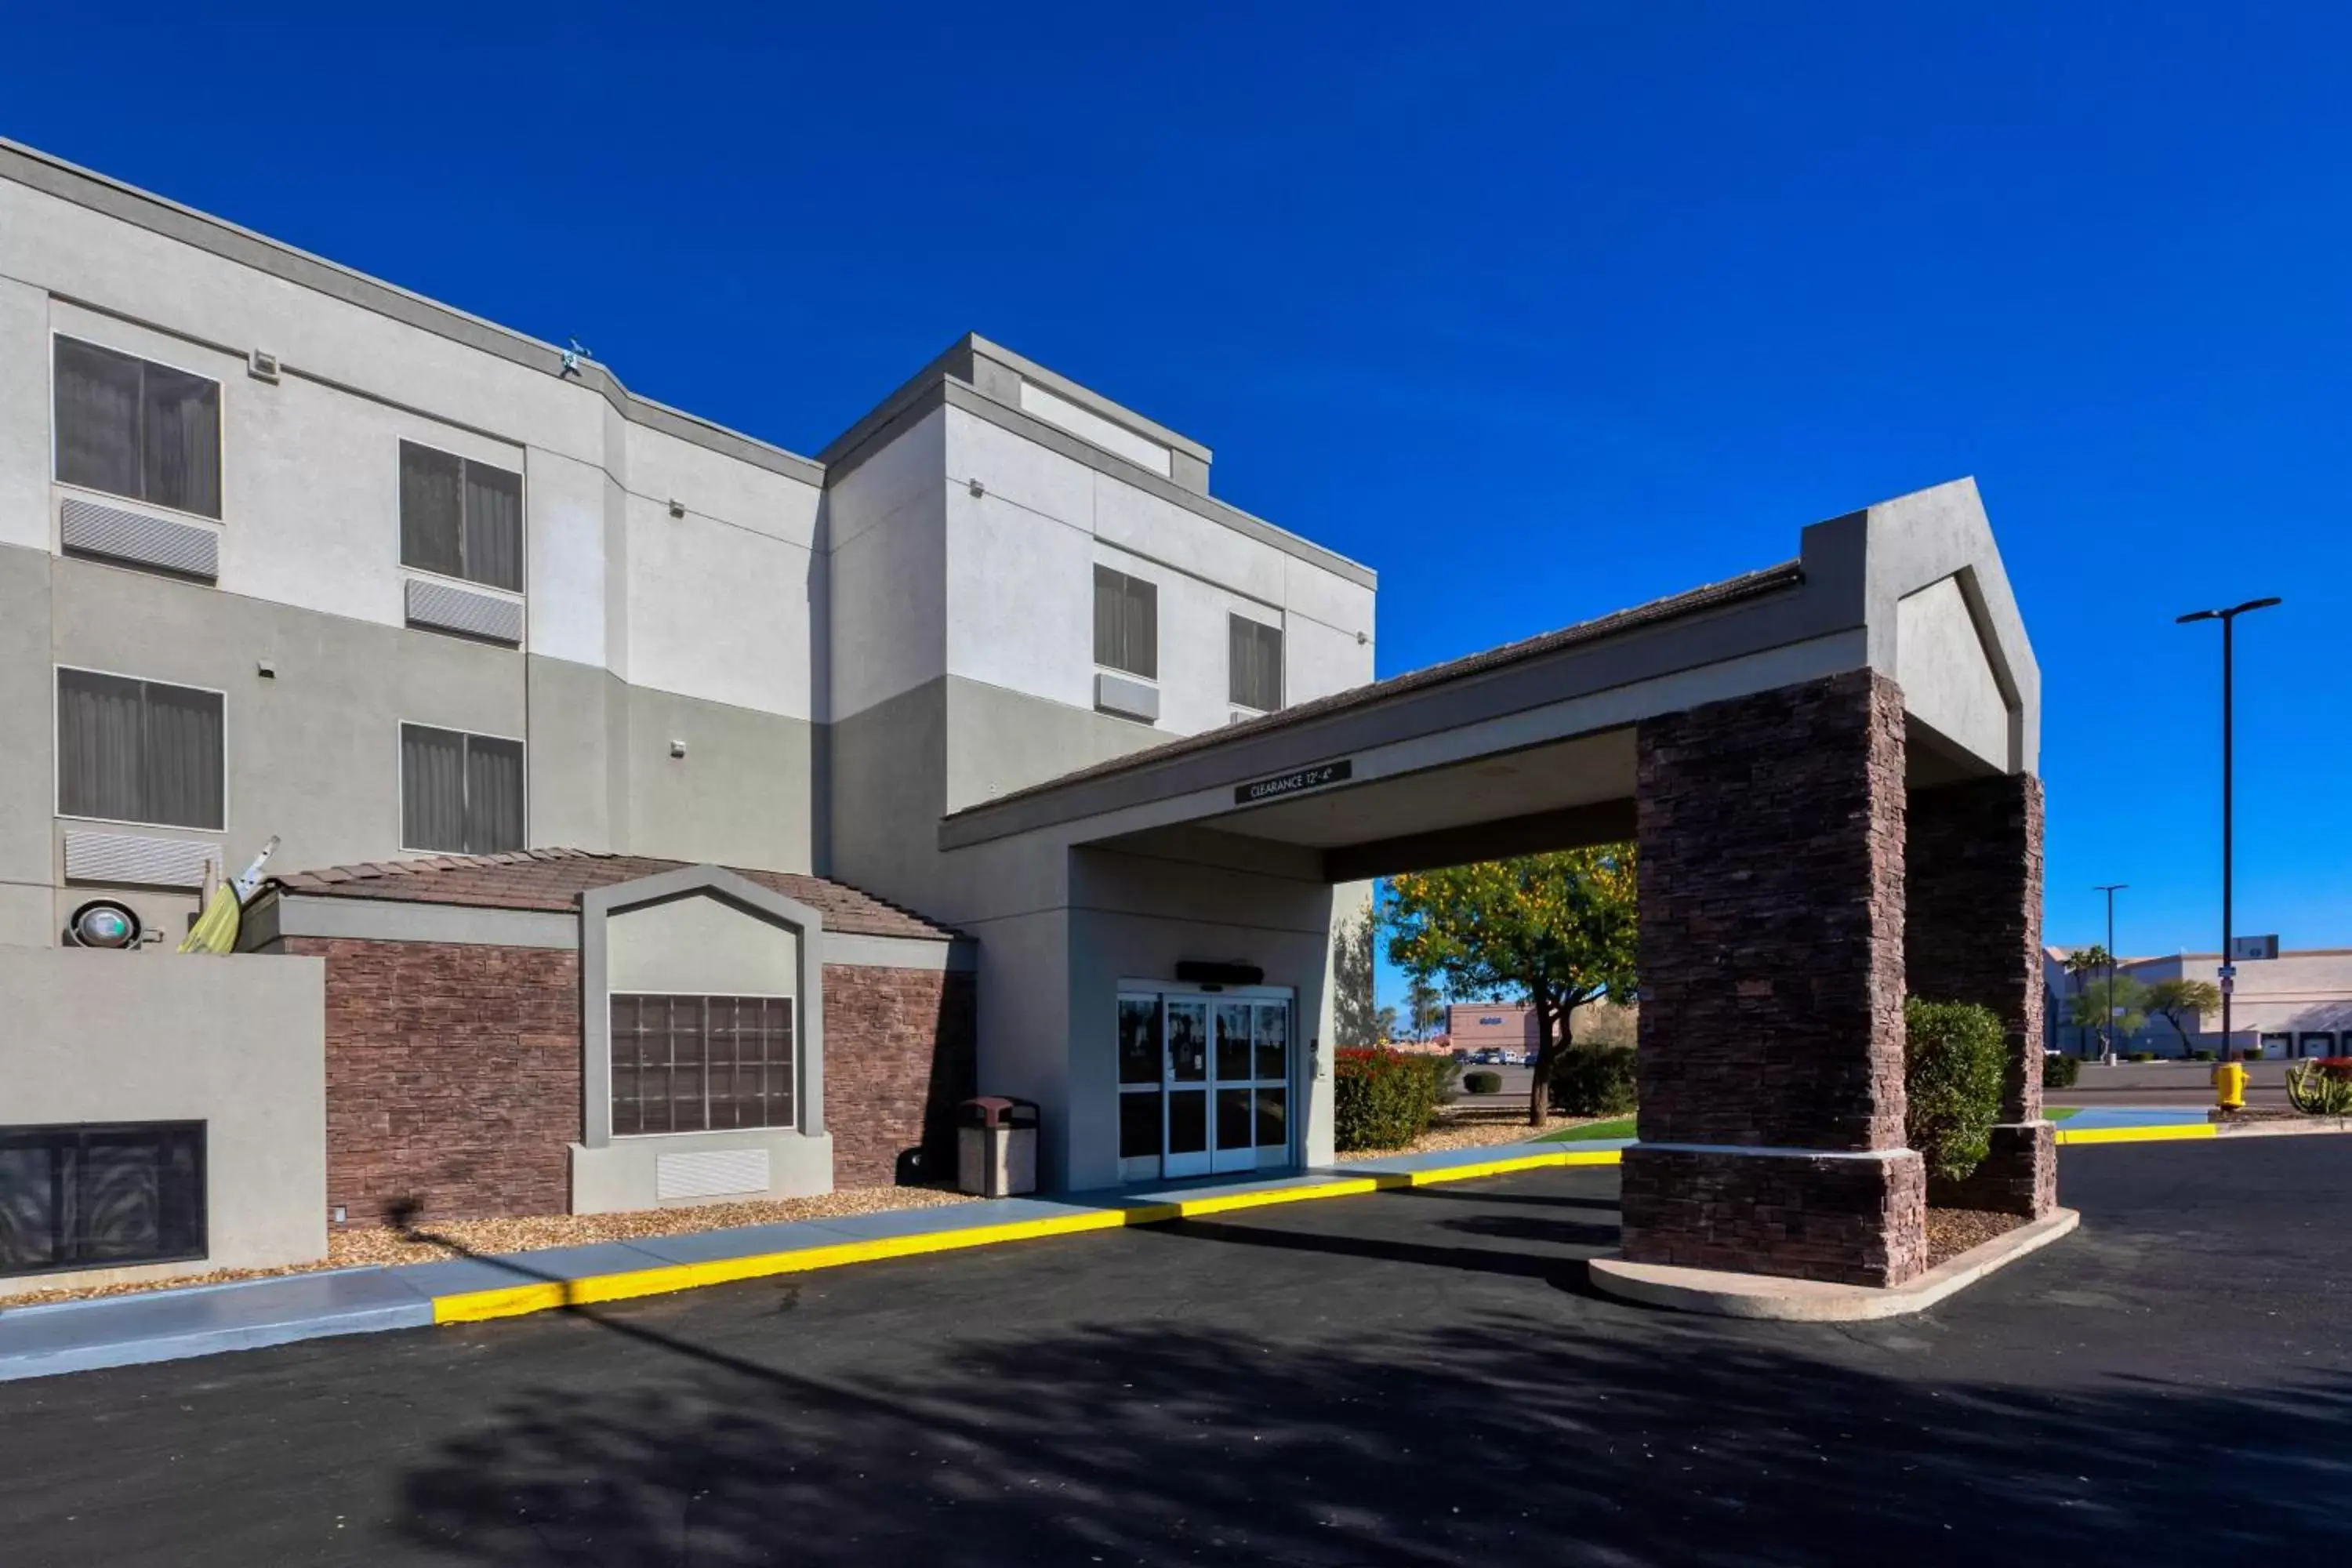 Property Building in Surestay Plus Hotel by Best Western Superstition Springs